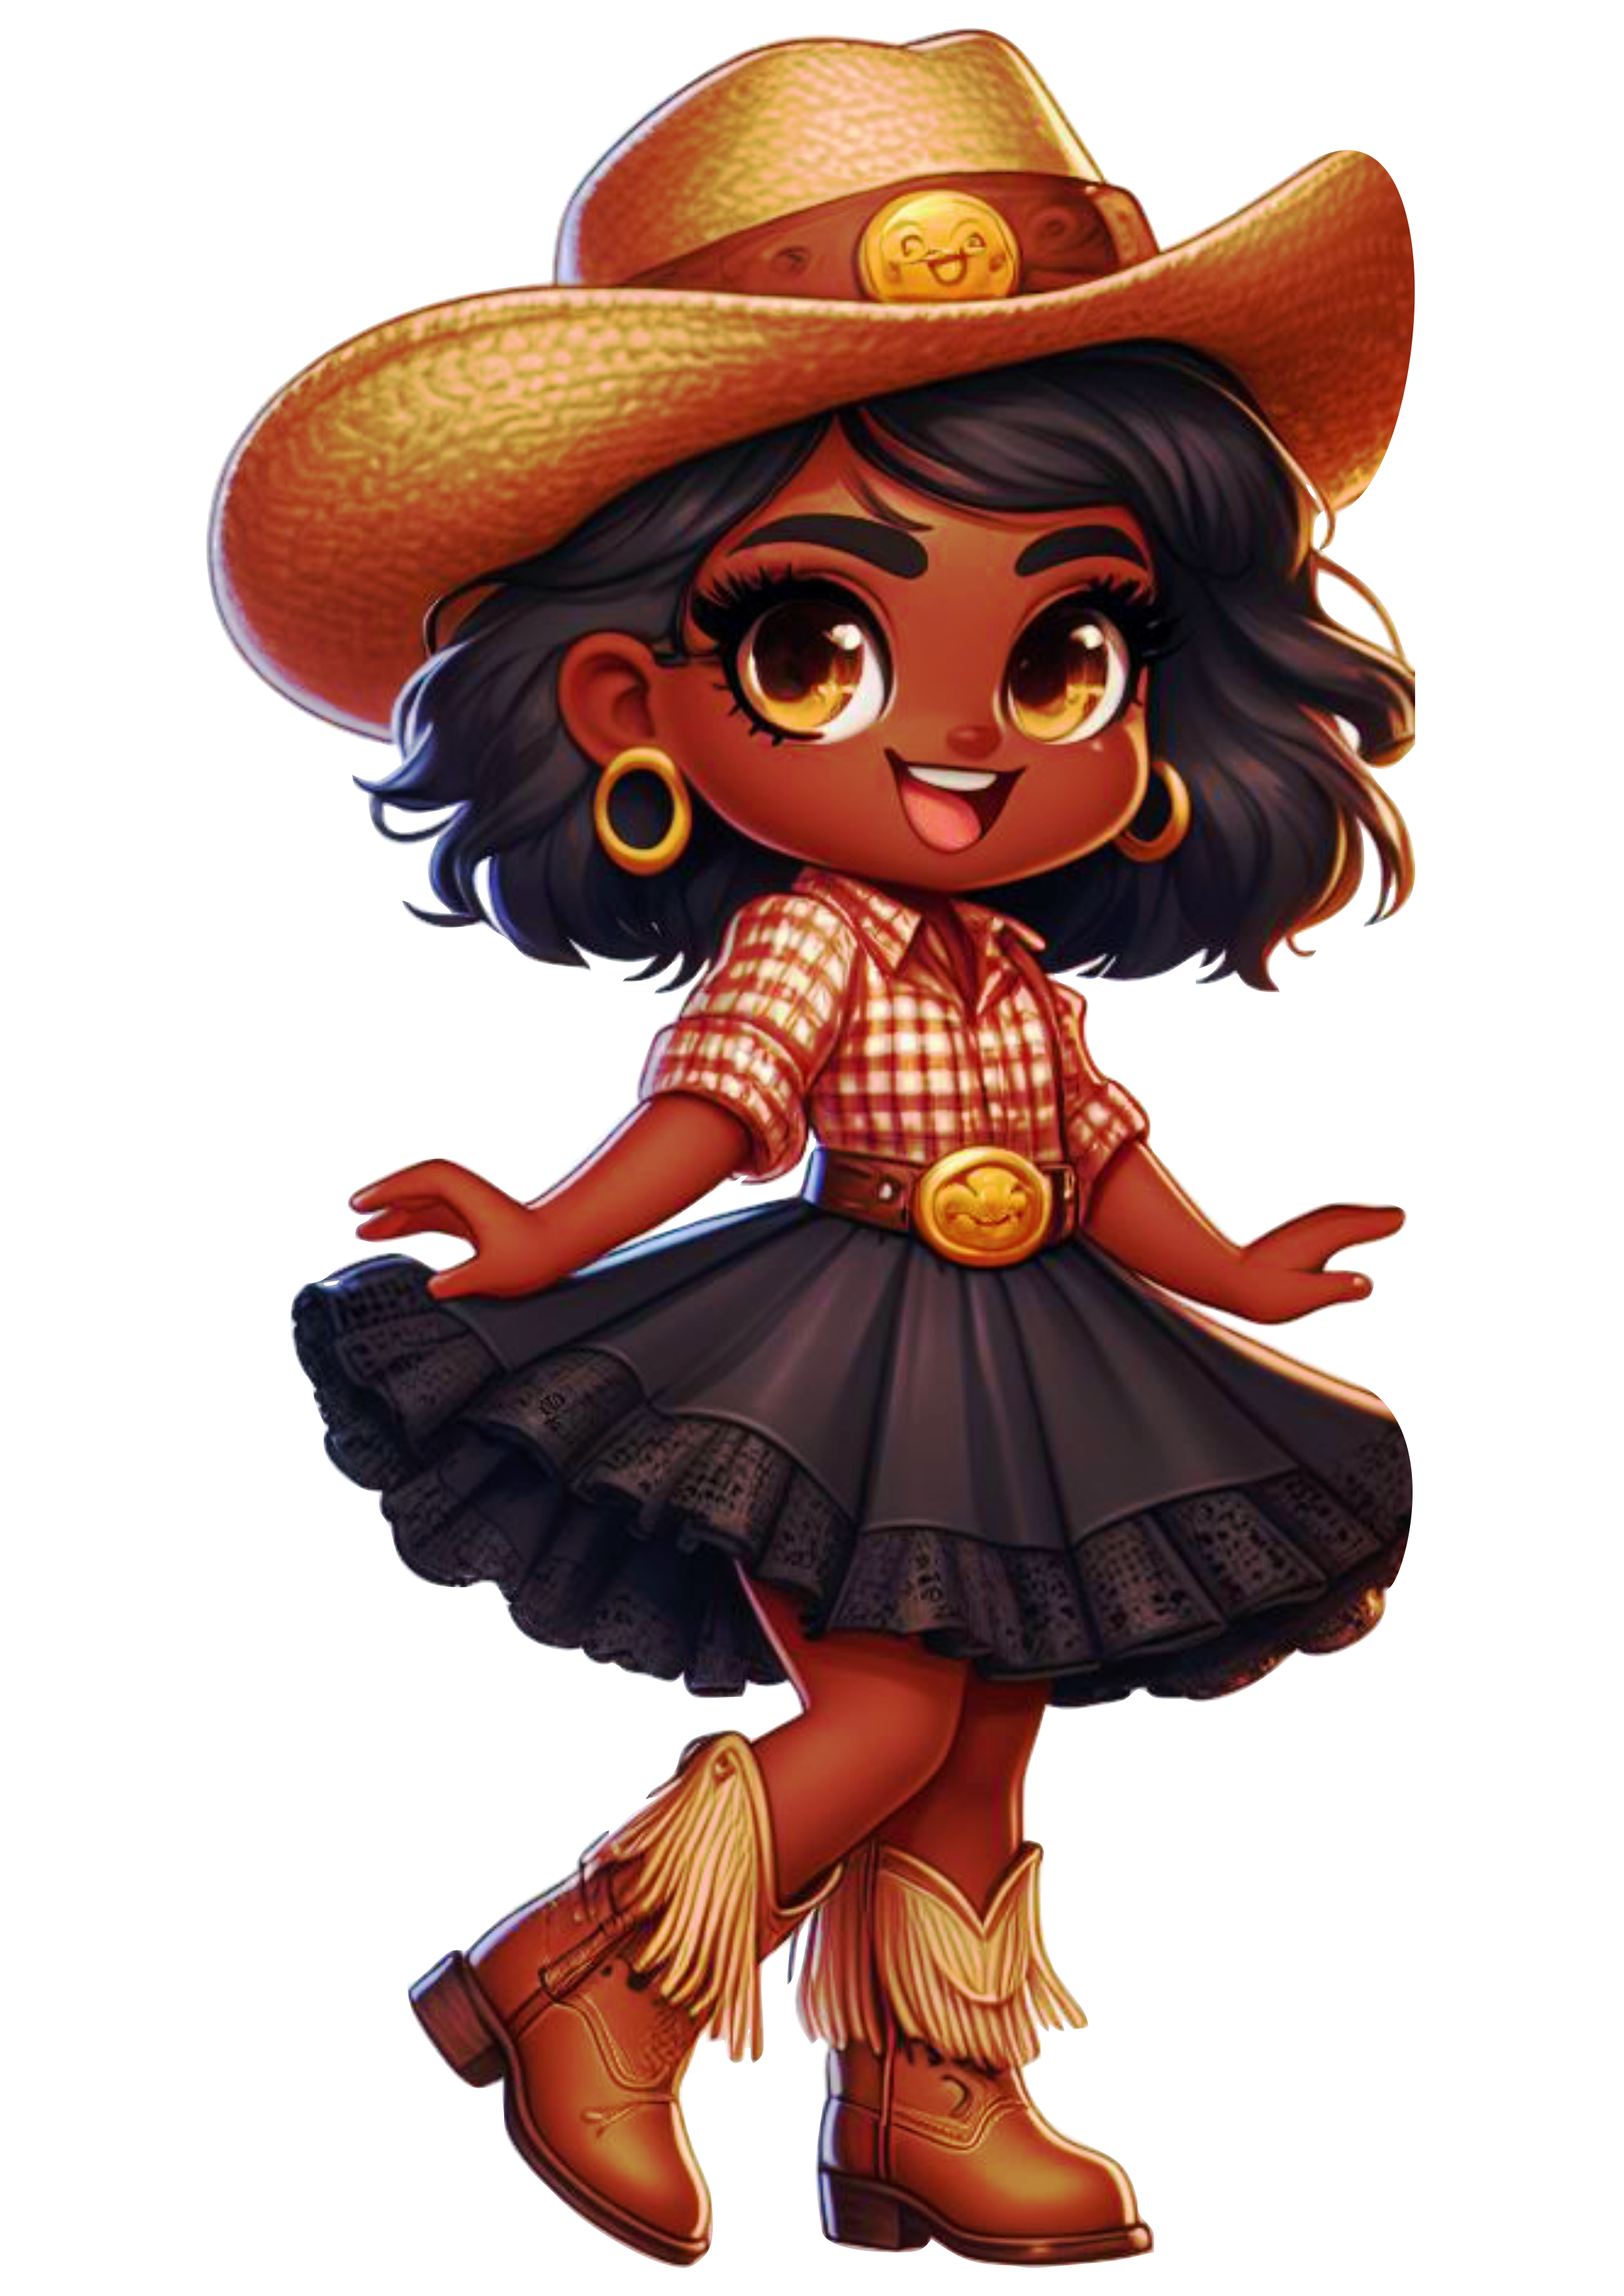 Pack of images Festa Junina São João girl in dress and braids hat and boots cute drawing png